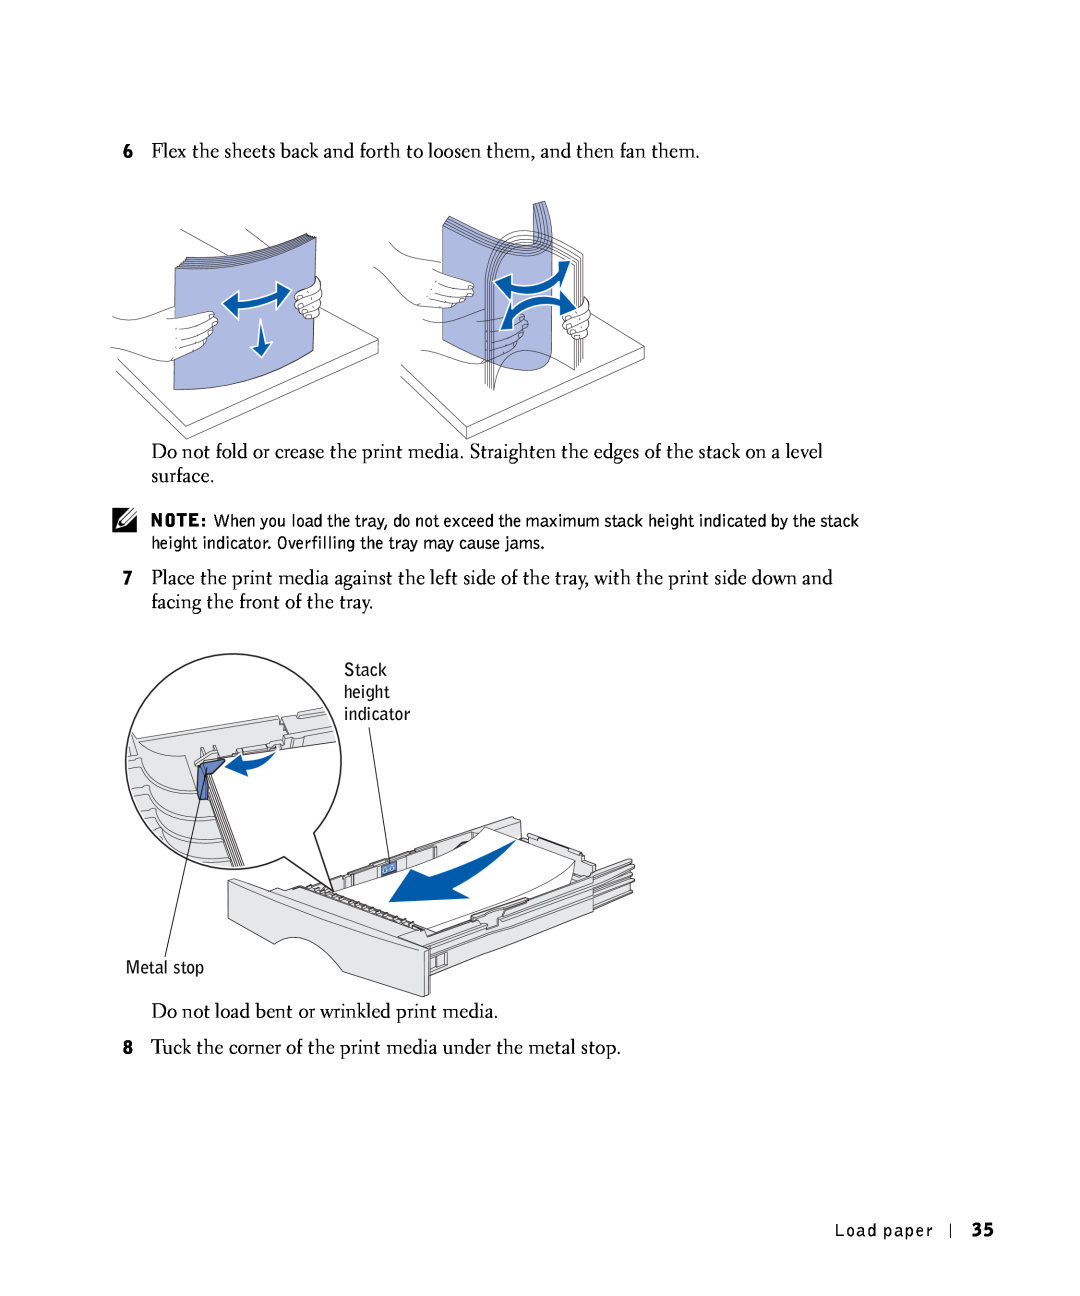 Dell S2500 owner manual Flex the sheets back and forth to loosen them, and then fan them 